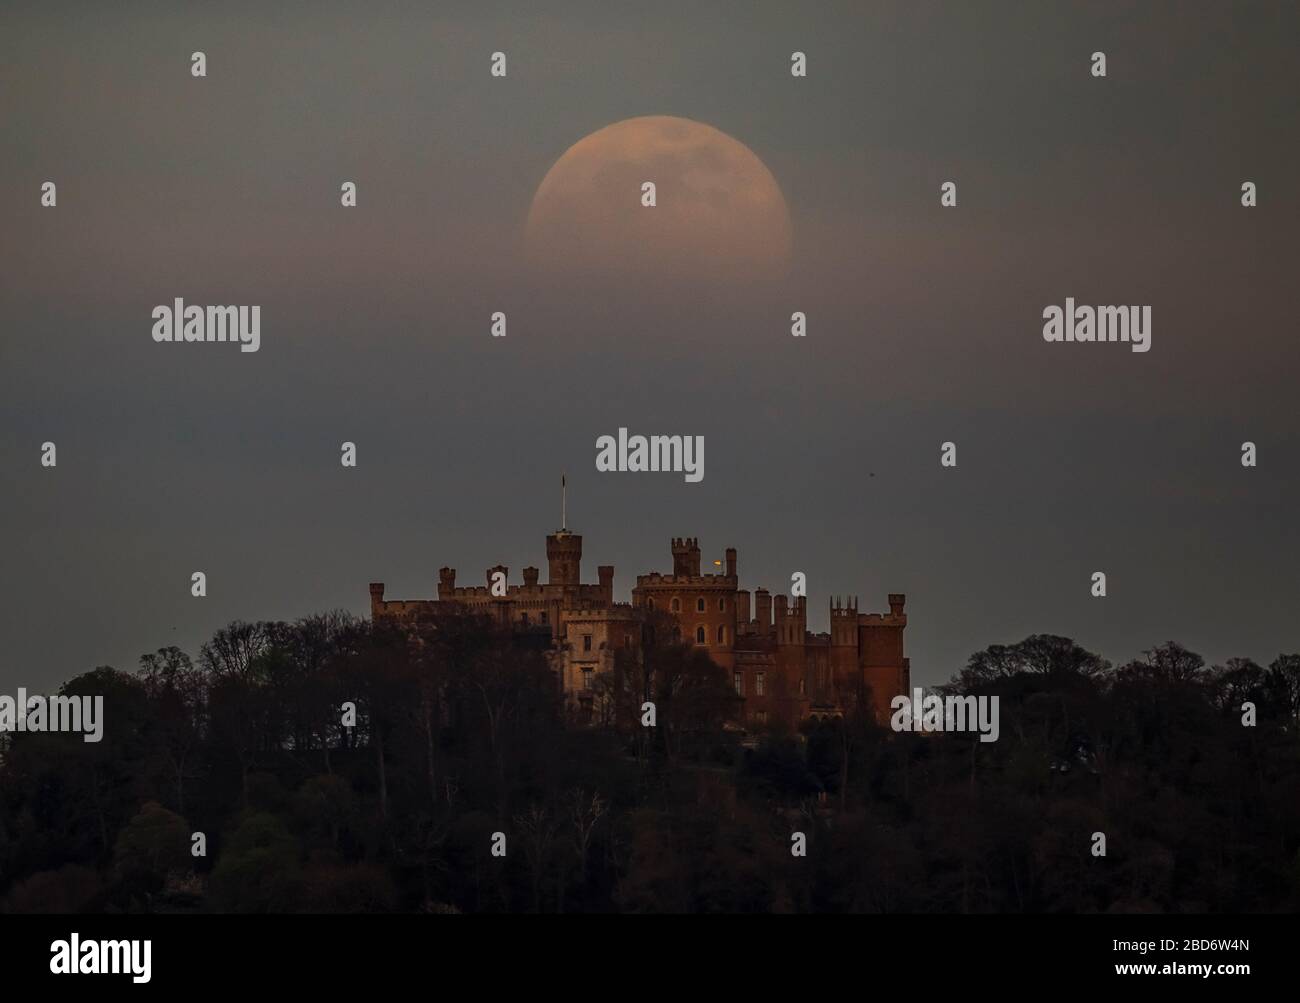 A pink supermoon is seen over Belvoir castle in Leicestershire. Despite its name, there is no actual colour change to the appearance of the lunar surface - it is a Northern Native American reference to an early-blooming wildflower, which starts to pop up in the US and Canada at the beginning of spring. Stock Photo